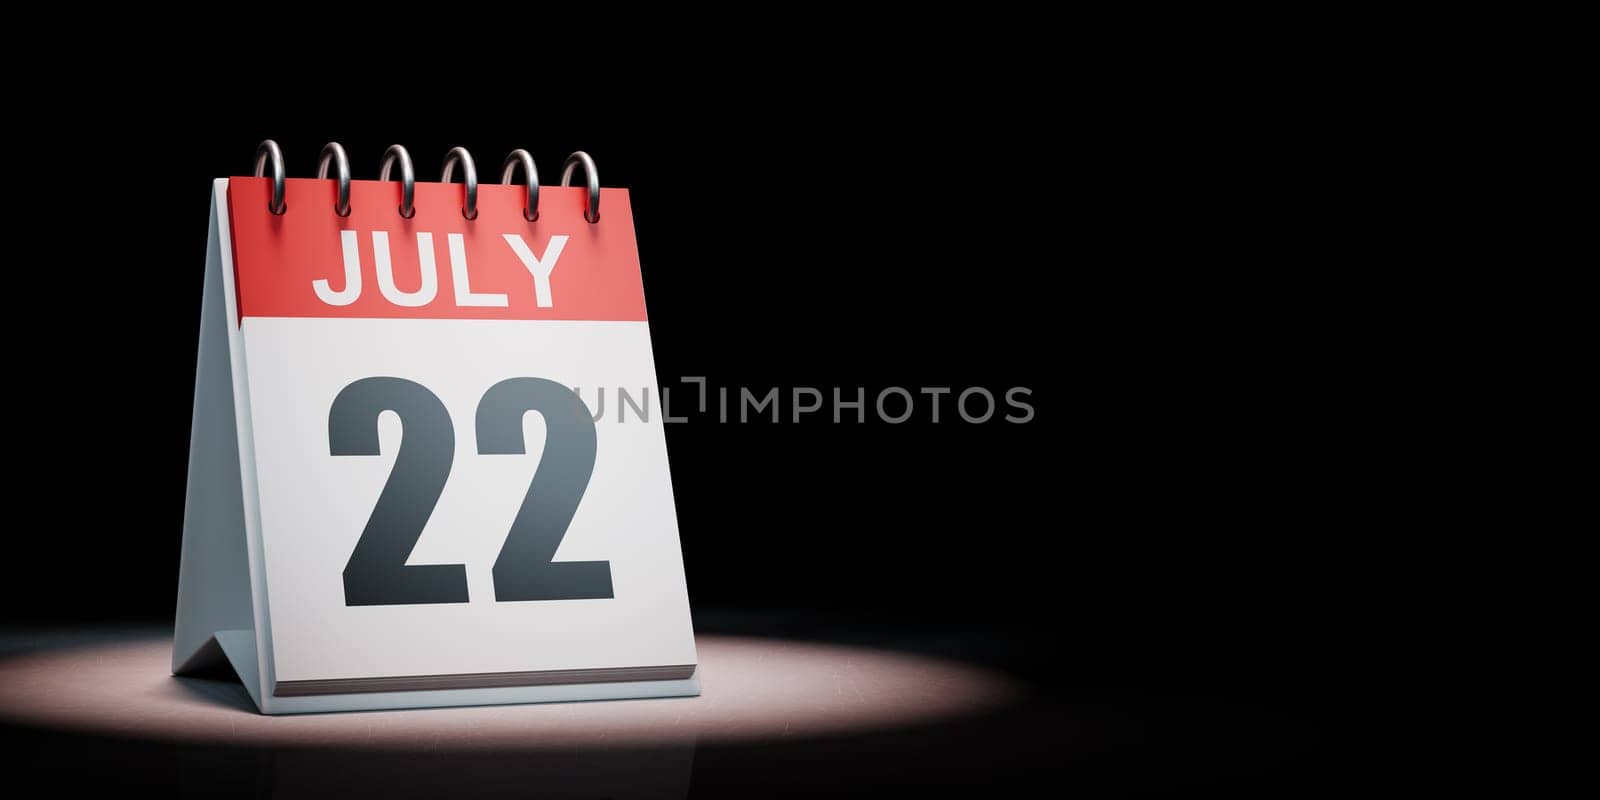 Red and White July 22 Desk Calendar Spotlighted on Black Background with Copy Space 3D Illustration